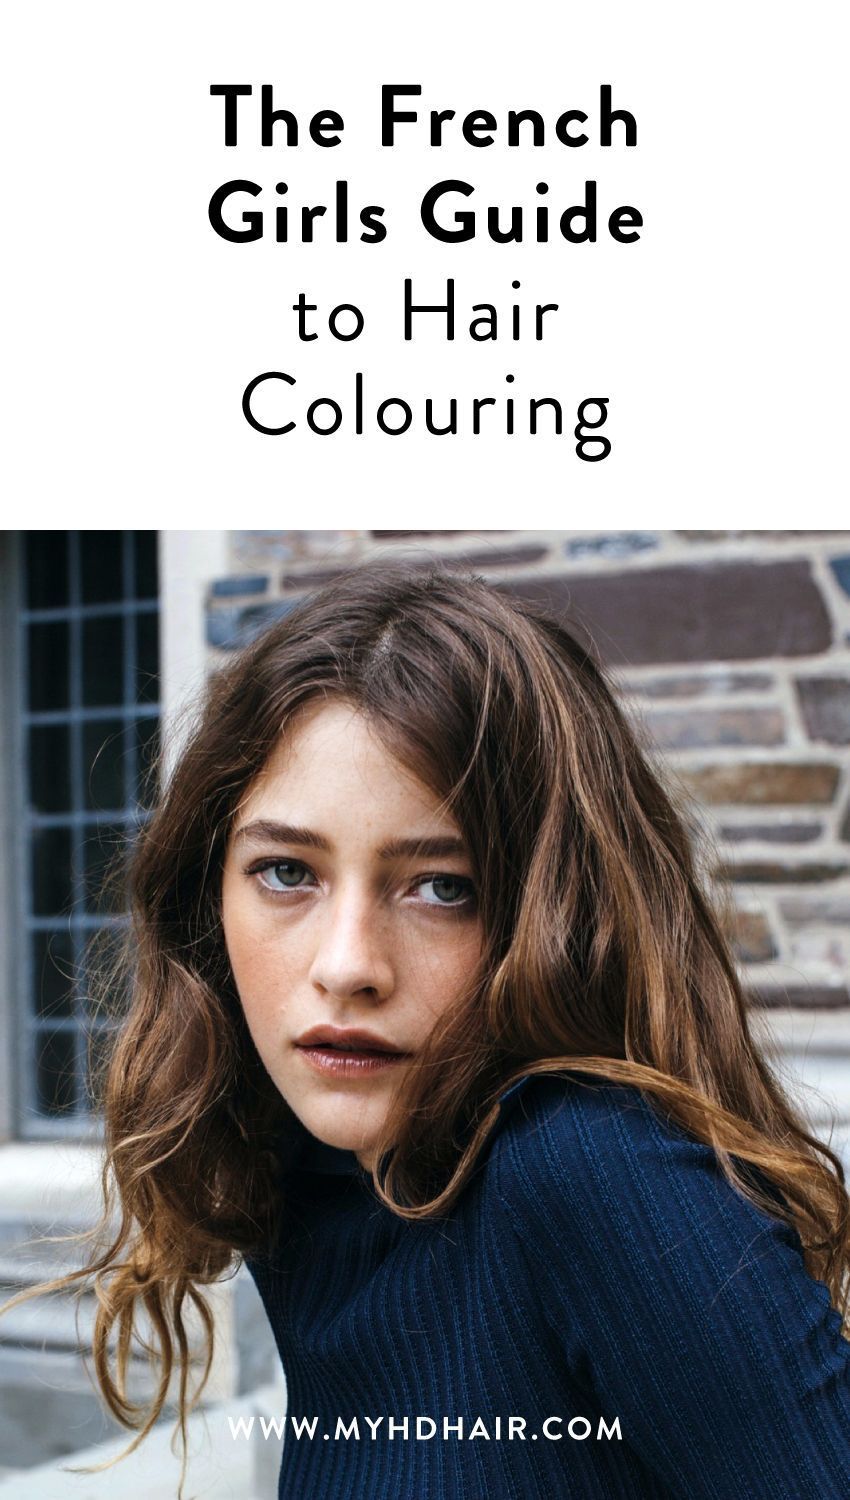 The French Girls Guide to Hair Colouring - The French Girls Guide to Hair Colouring -   18 style French hair ideas